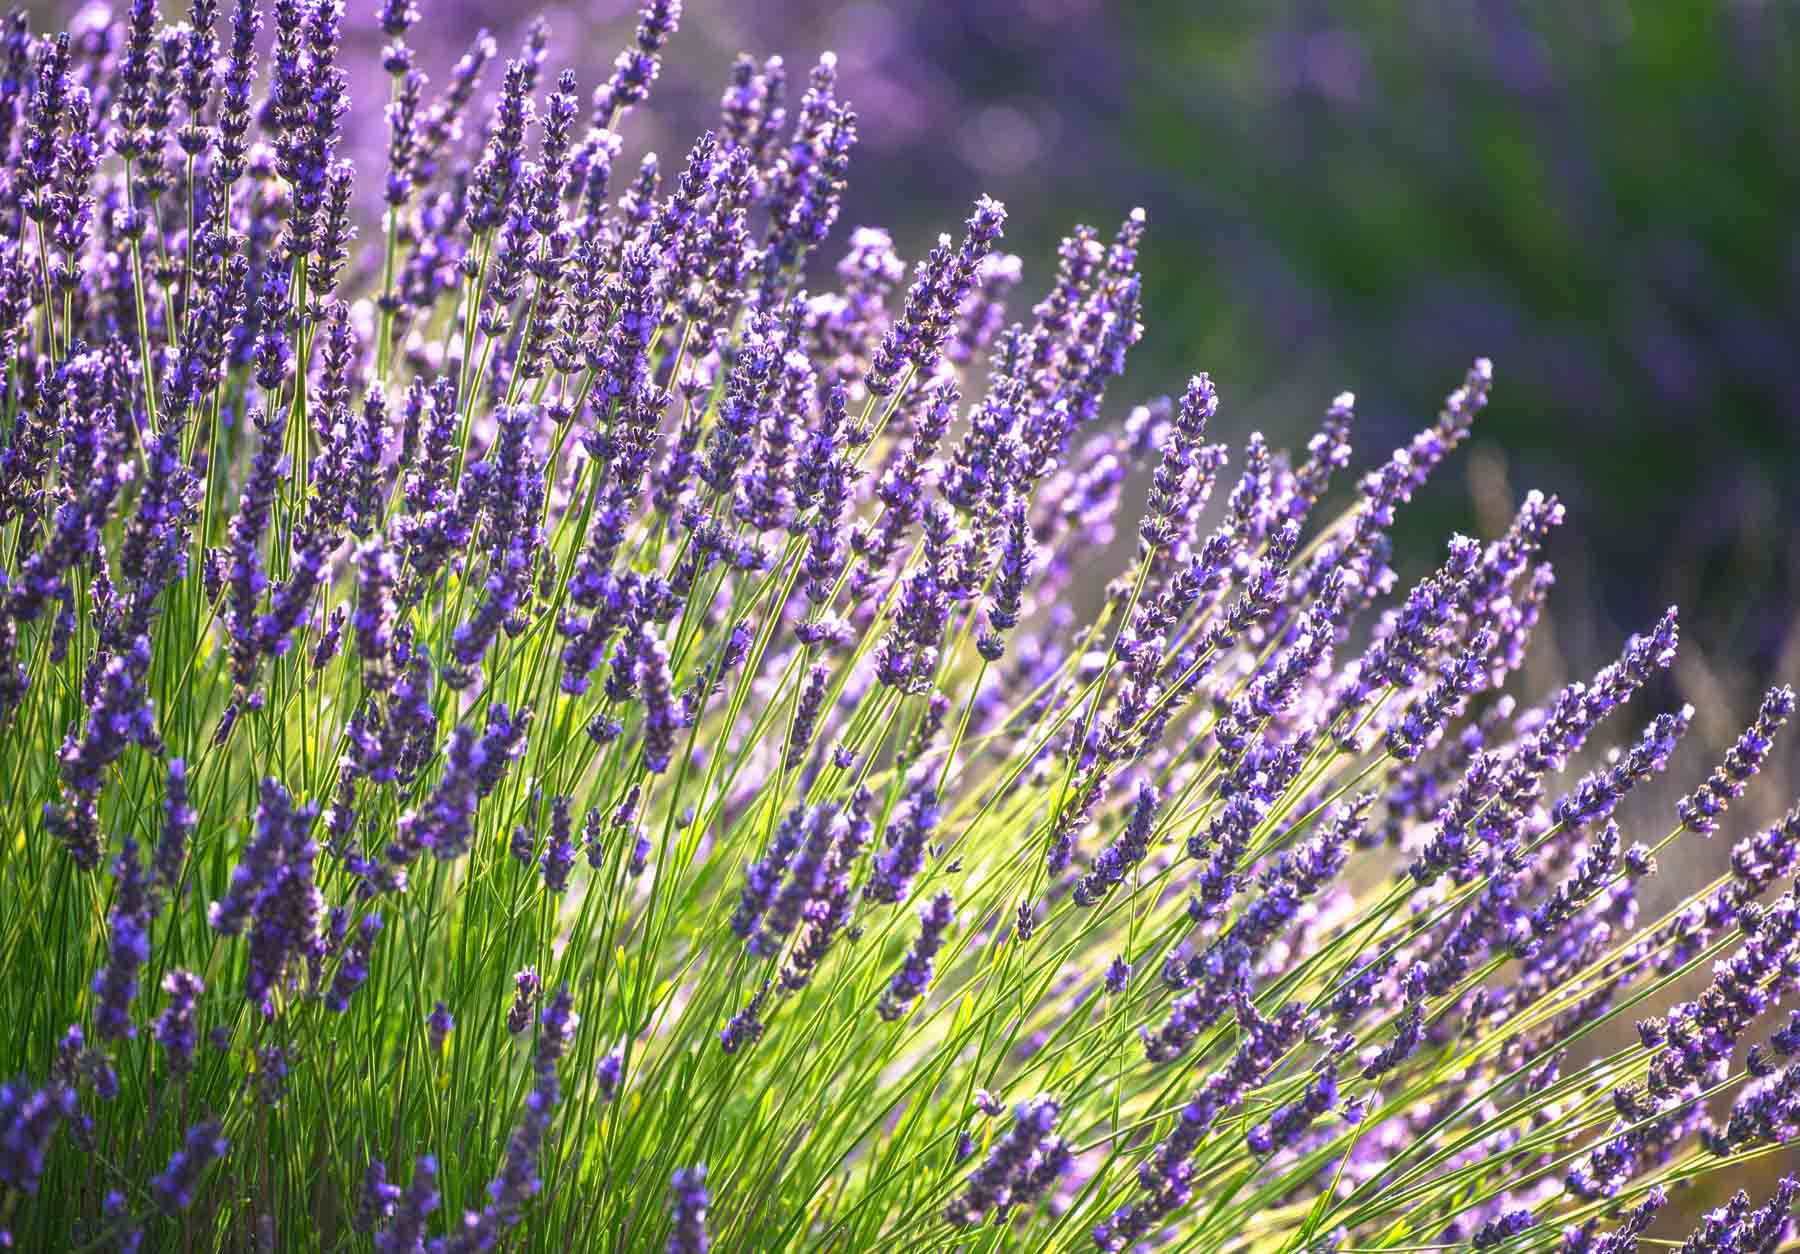 LAVENDER - How to Plant Lavender & Grow Bushy Plants with lots of Flowers 